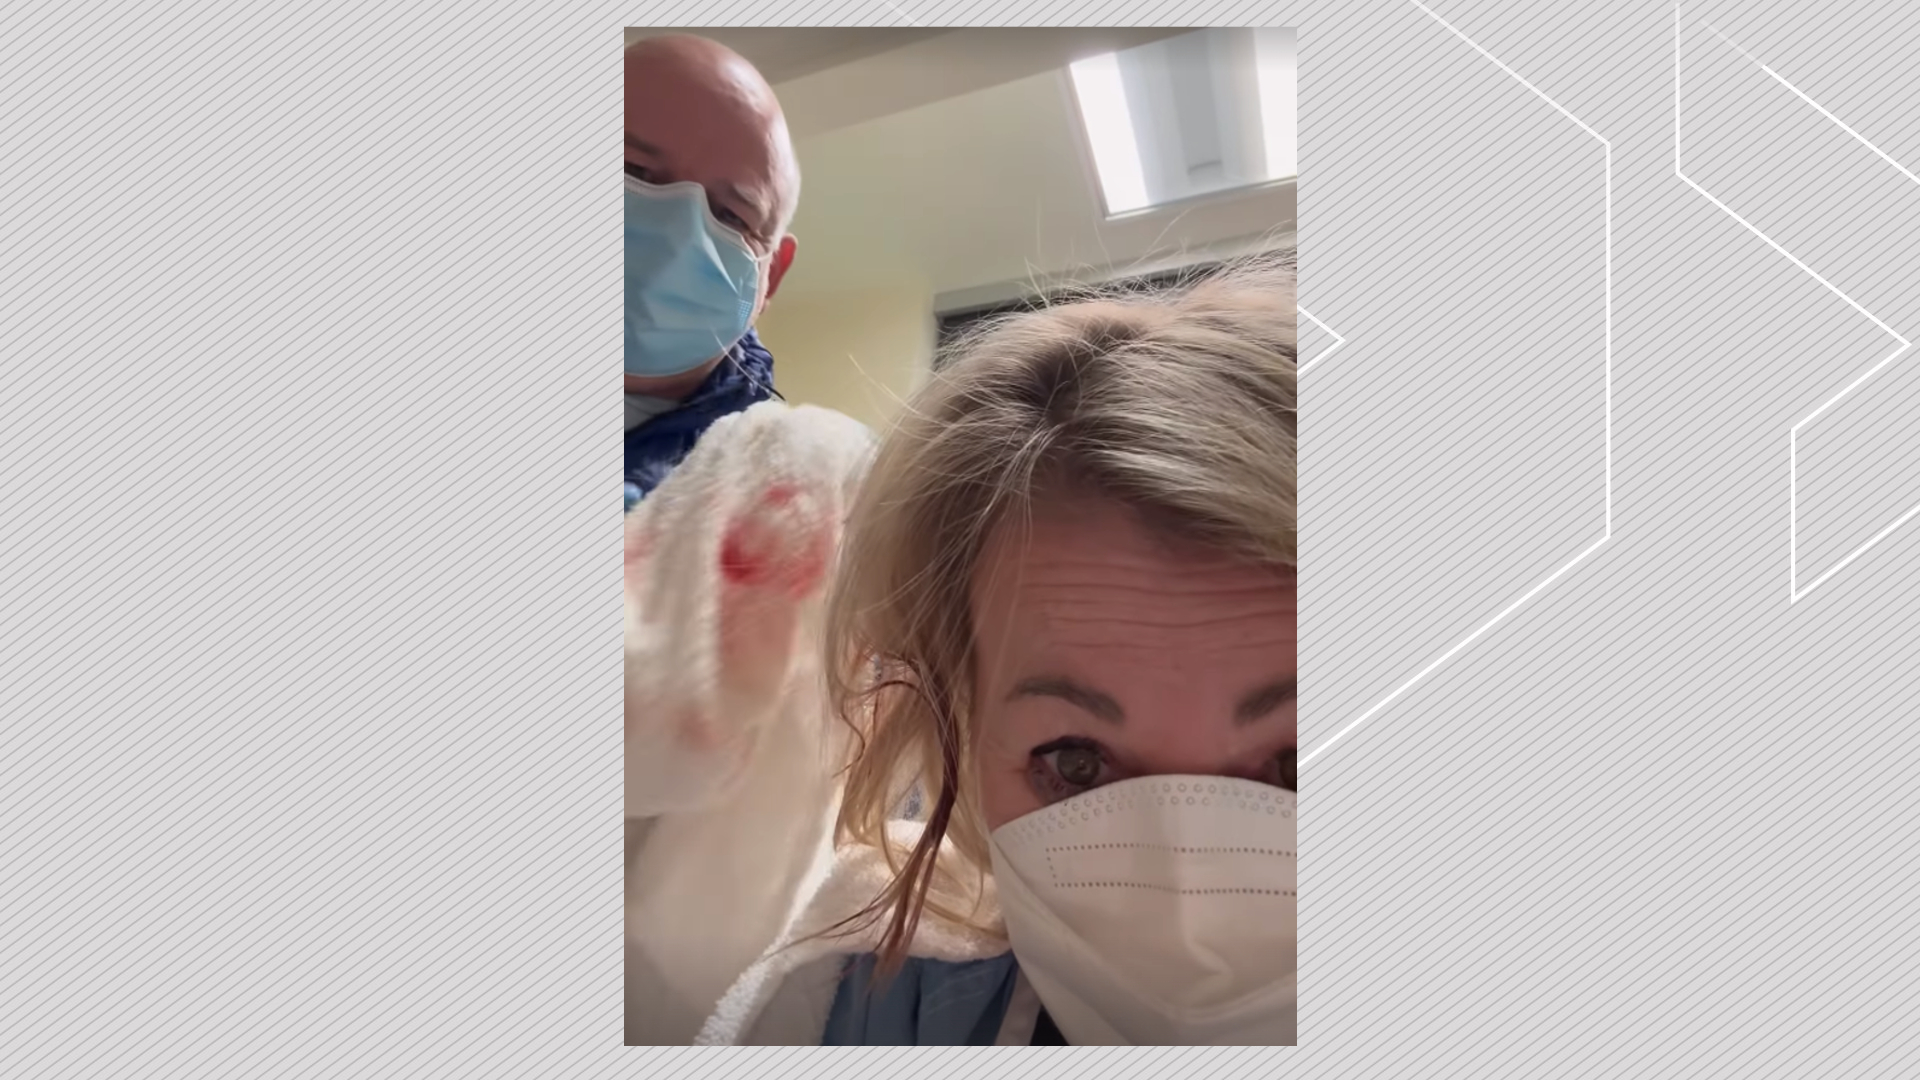 ‘Worst Tinder date ever’: Jann Arden asked to clean up own head wound in hospital